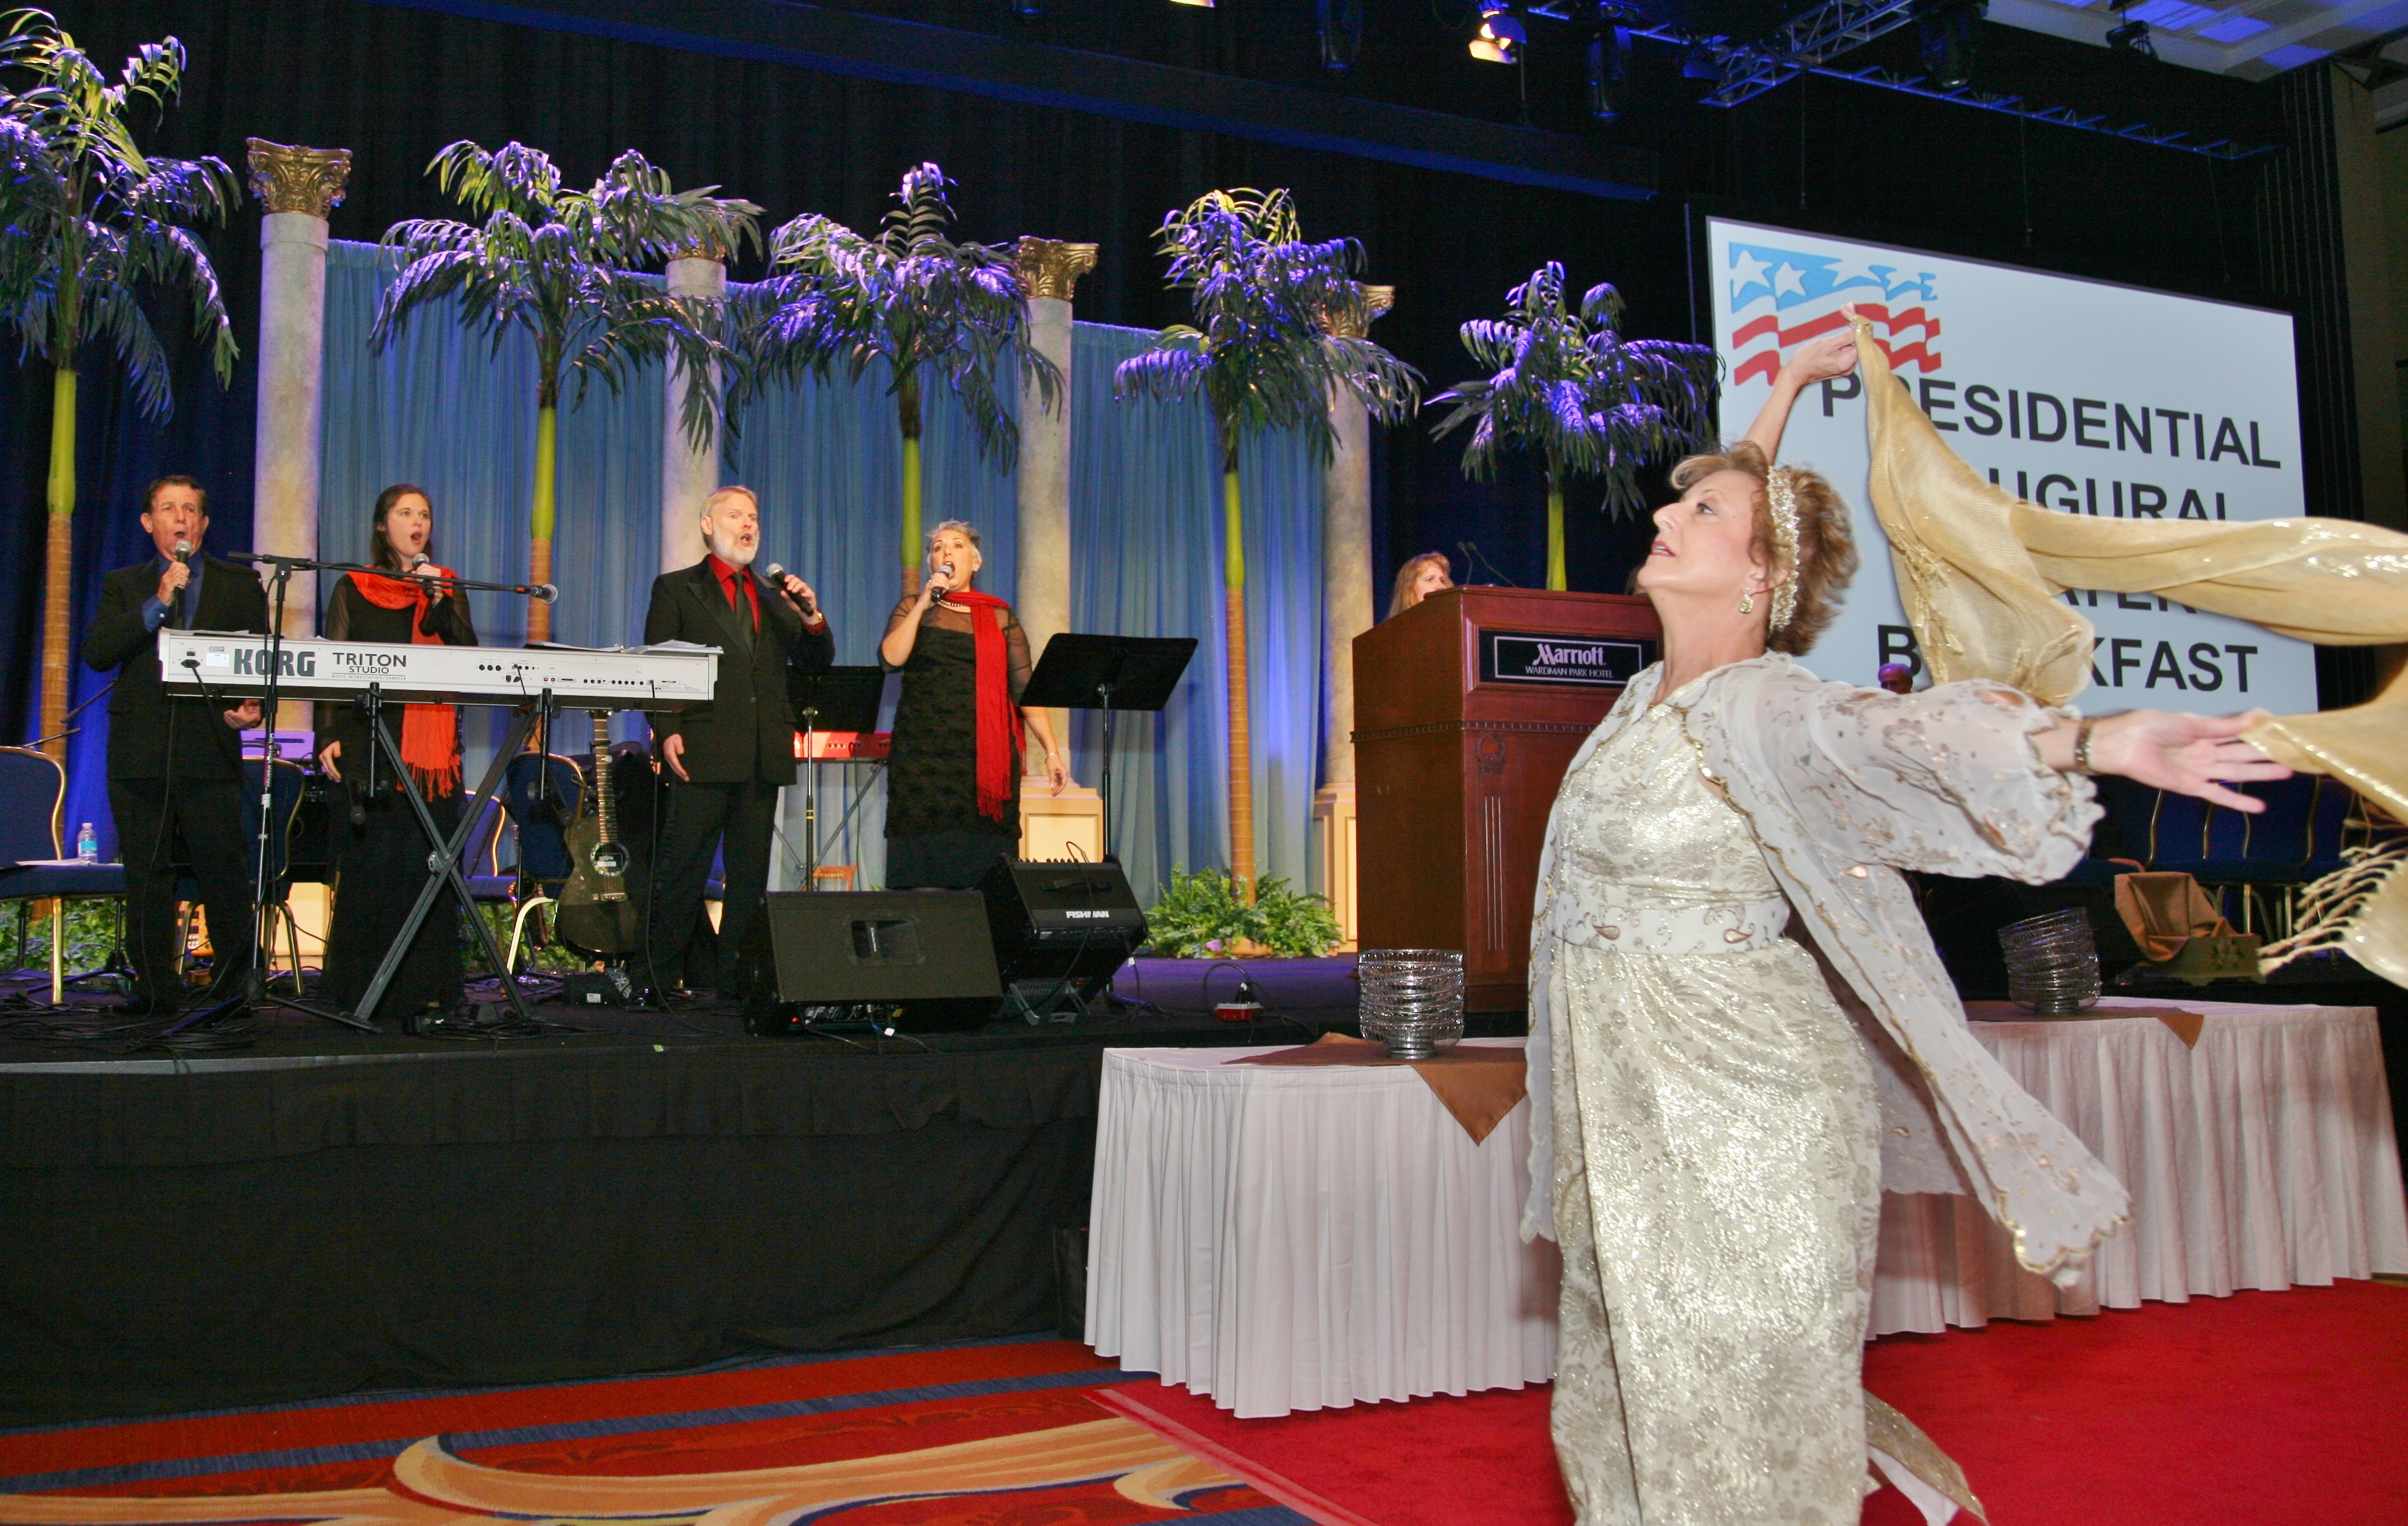 Performance at The Presidential Inaugural Prayer Breakfast, Jan. 21, 2013 with George Comtois, Desiree Lulay, Denny Hollowell, DeAnn Trimachi, Carolyn Paddock